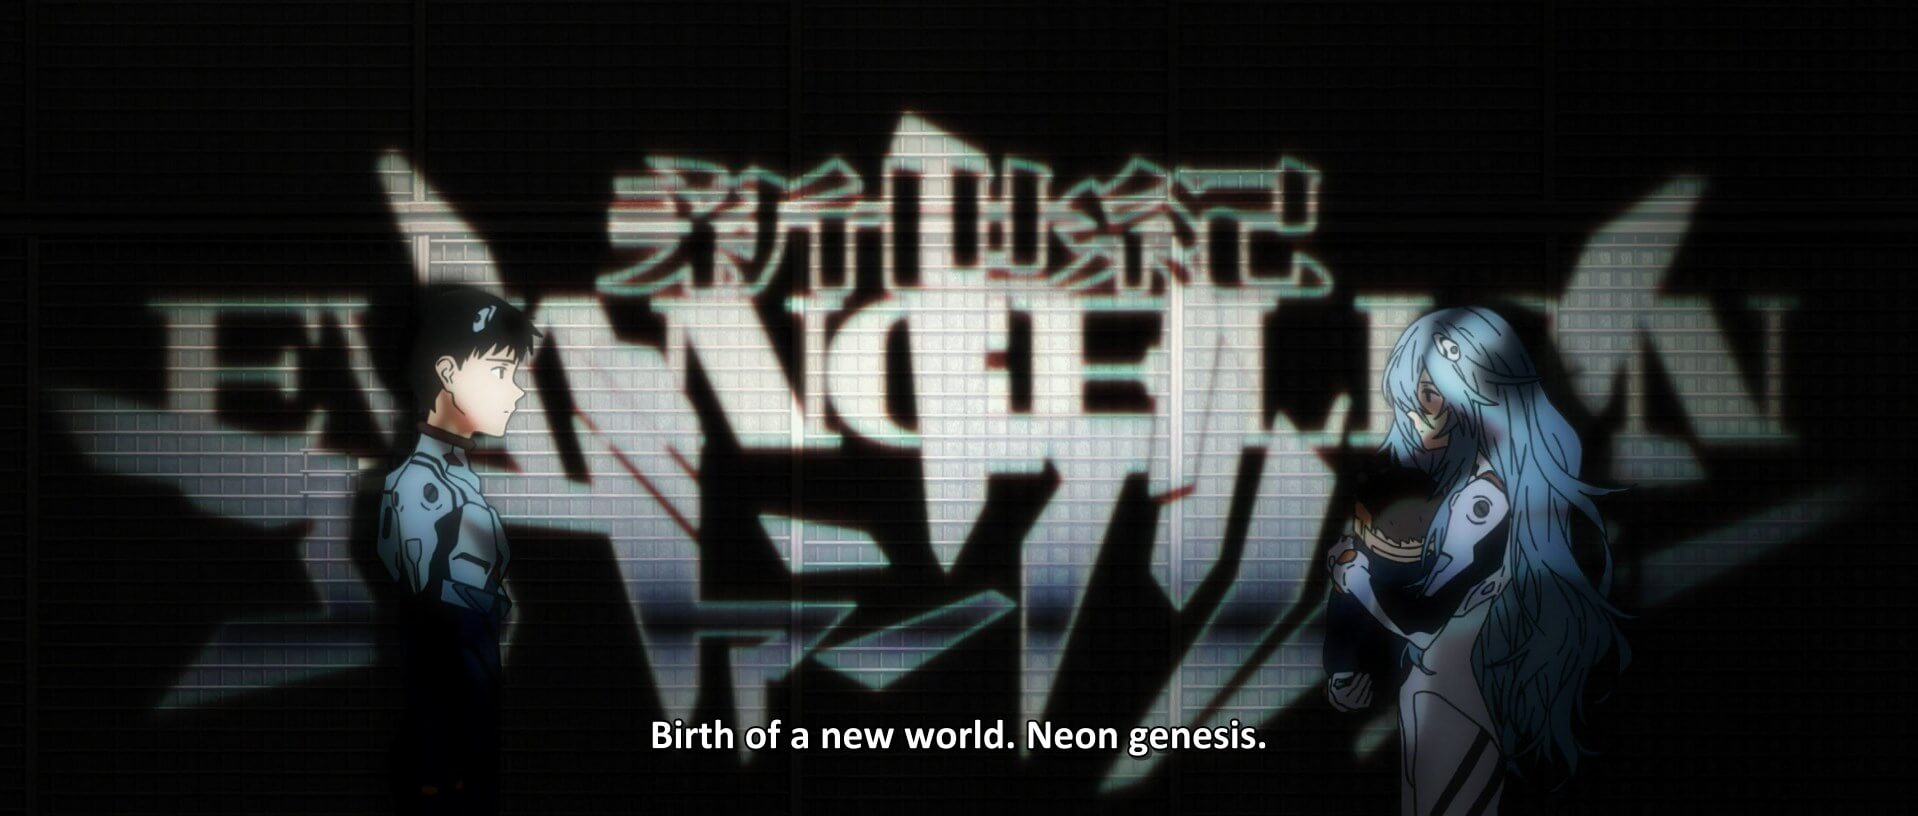 Truly, this is the Neon Genesis Evangelion.